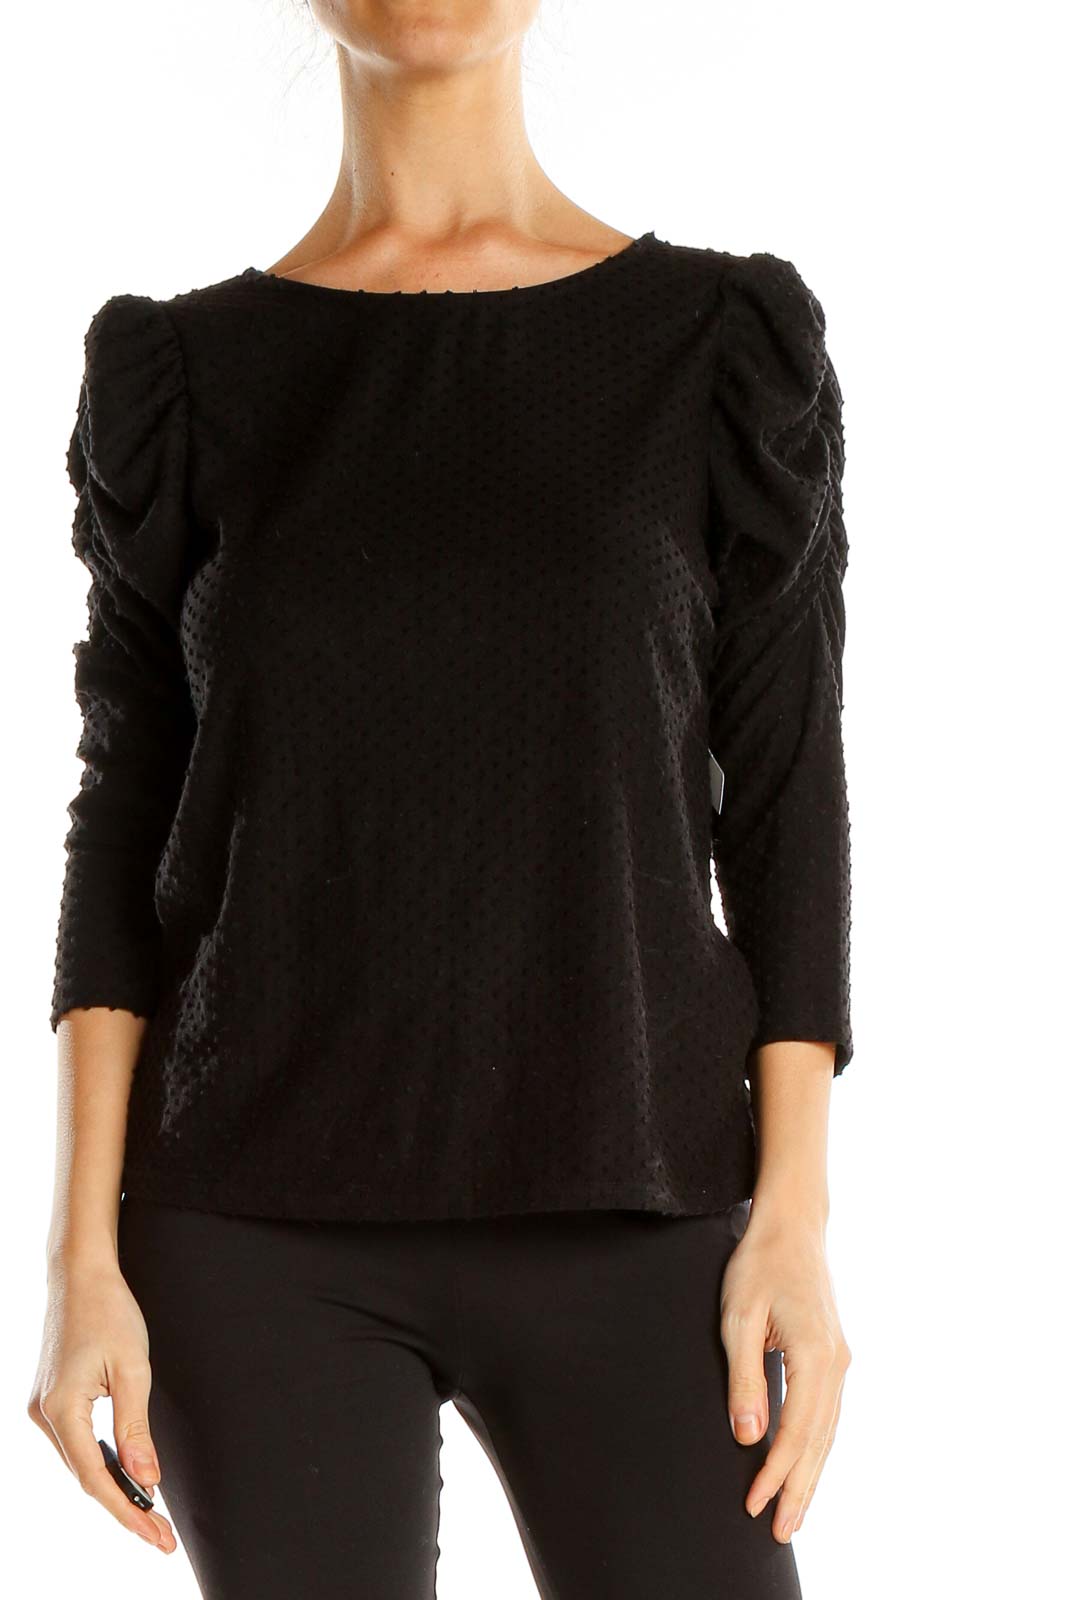 Black Textured Puffy Shoulder Chic Top Front